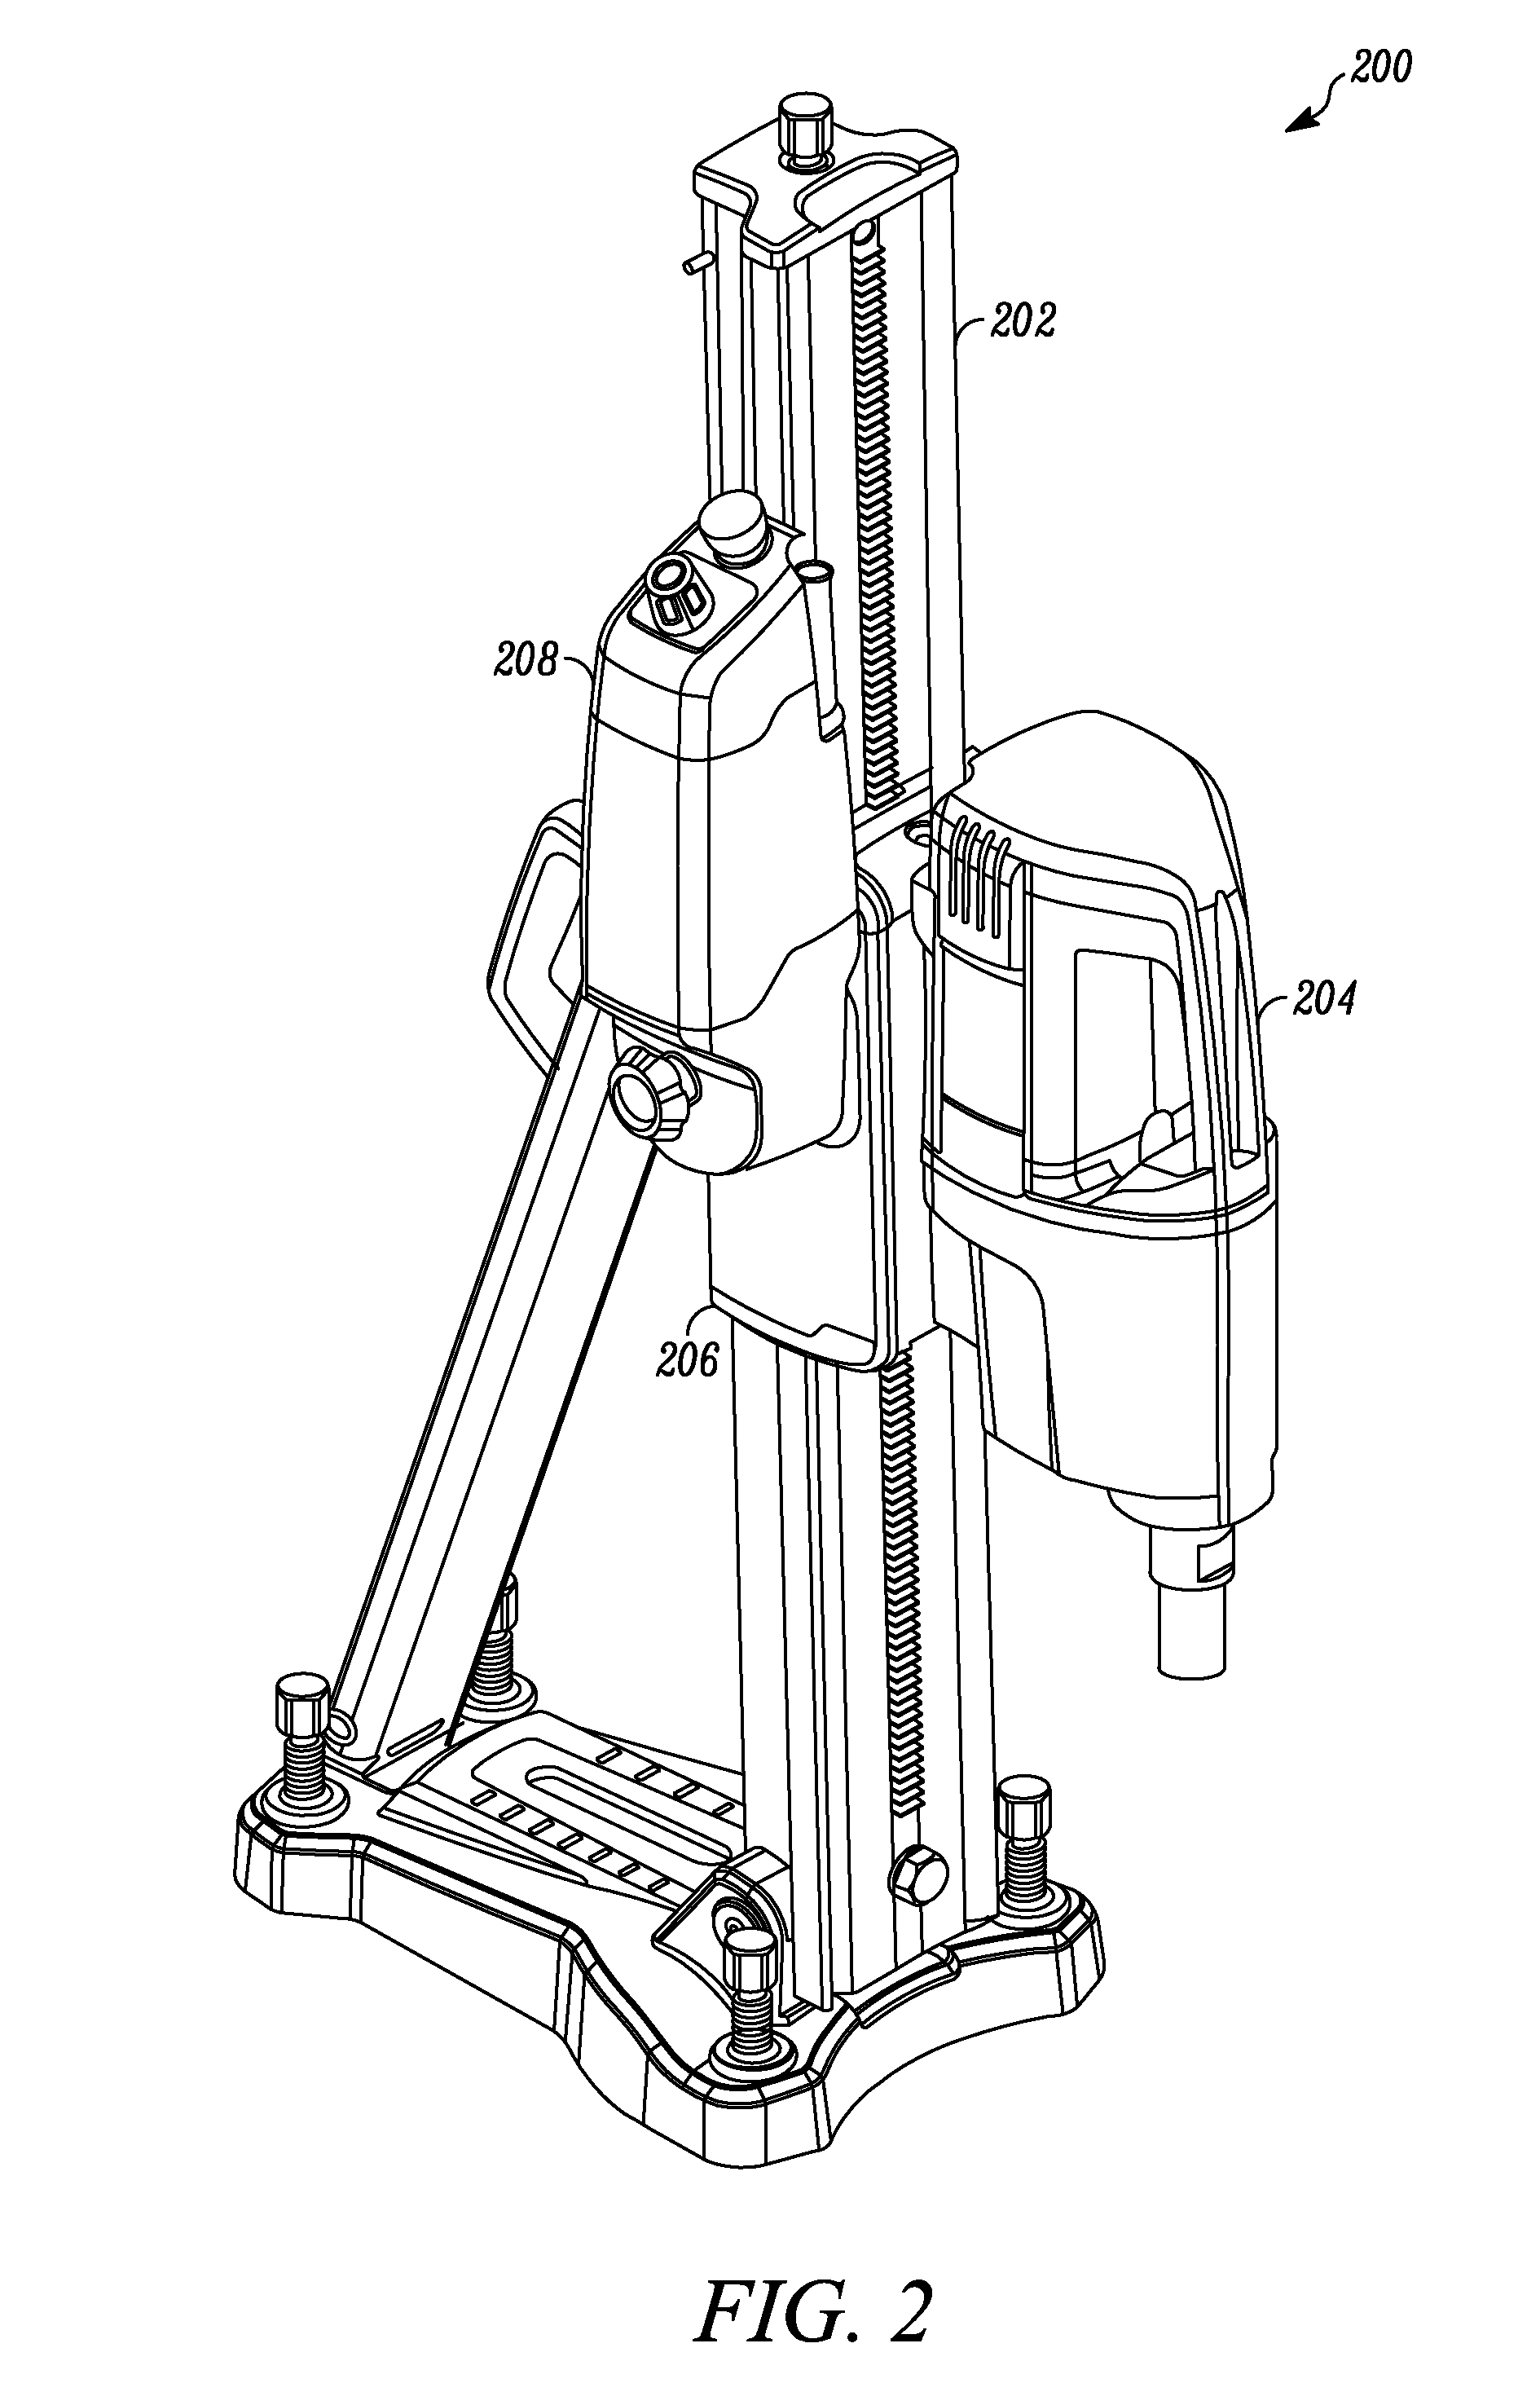 Drilling device with a controller for the feeding unit